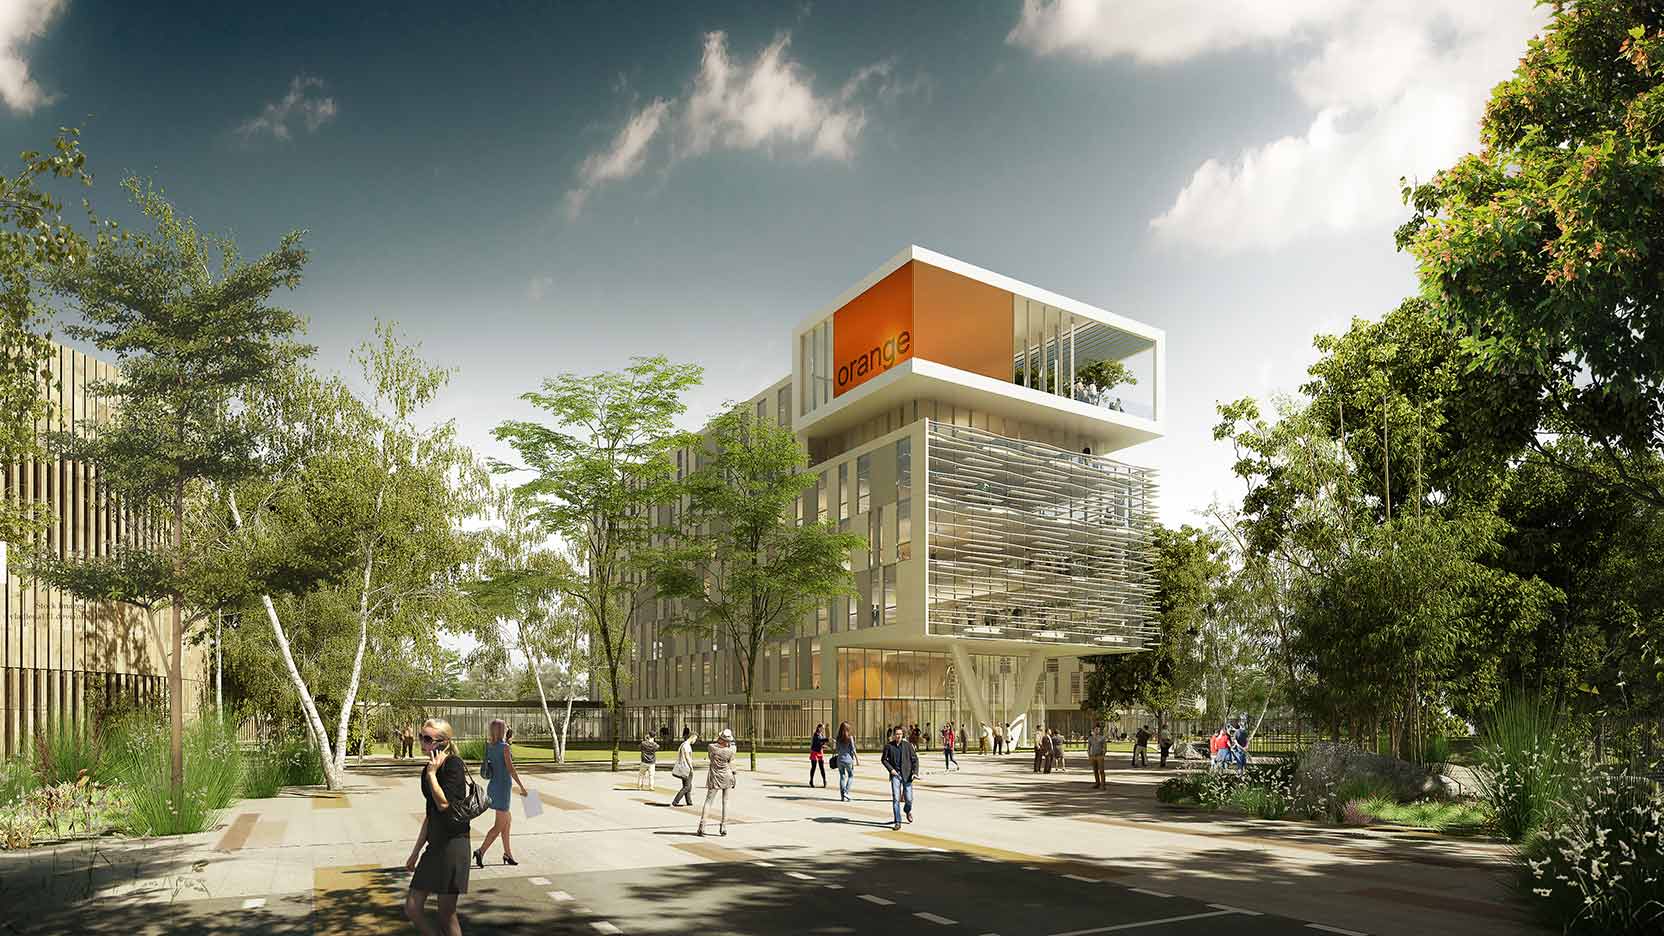 Pitch Promotion and GA Smart Building have just signed the creation of Orange Campus in Balma